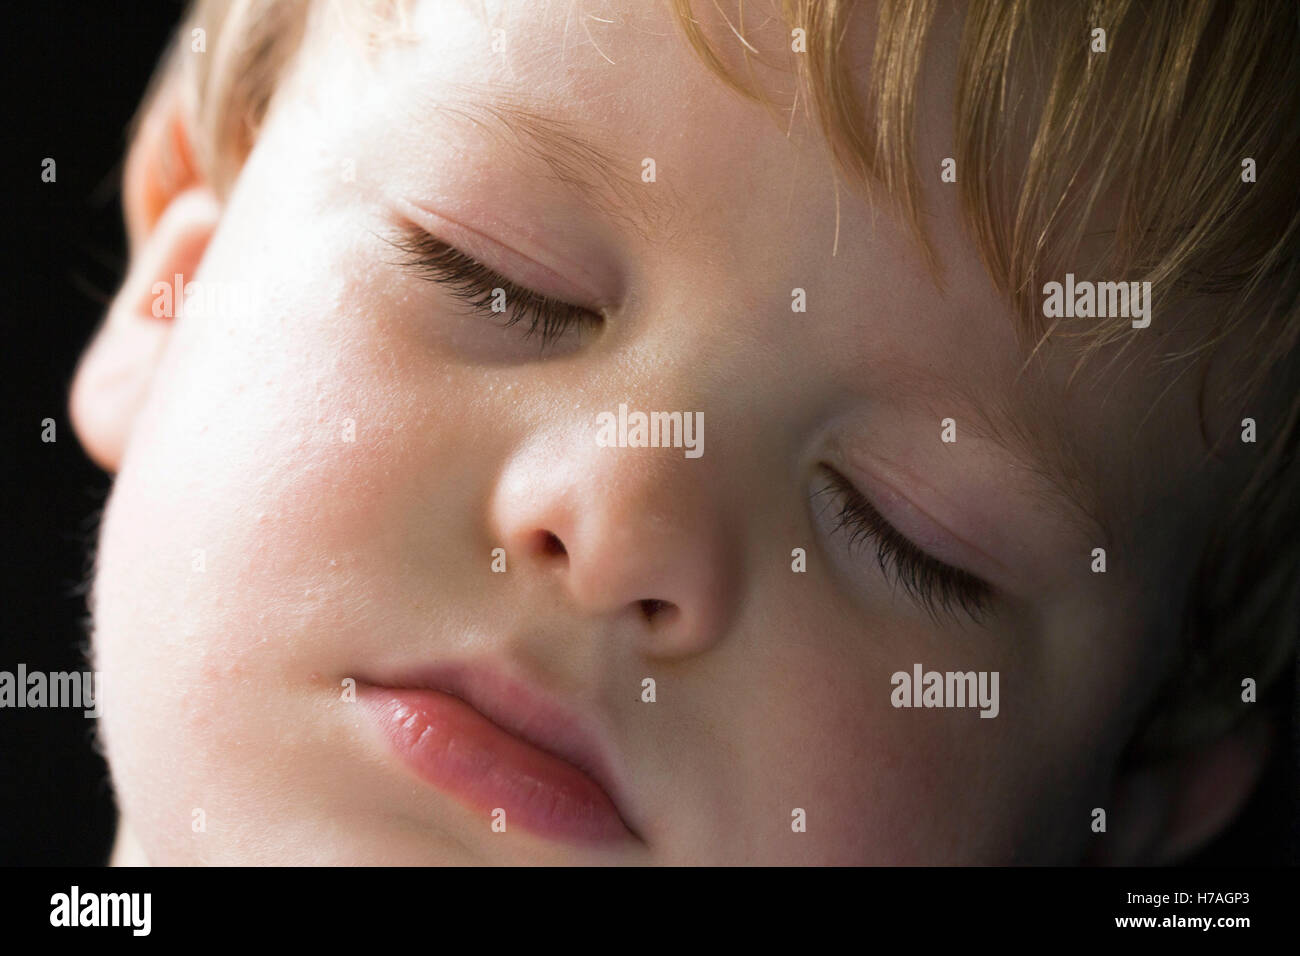 Close-up of young boy sleeping Stock Photo